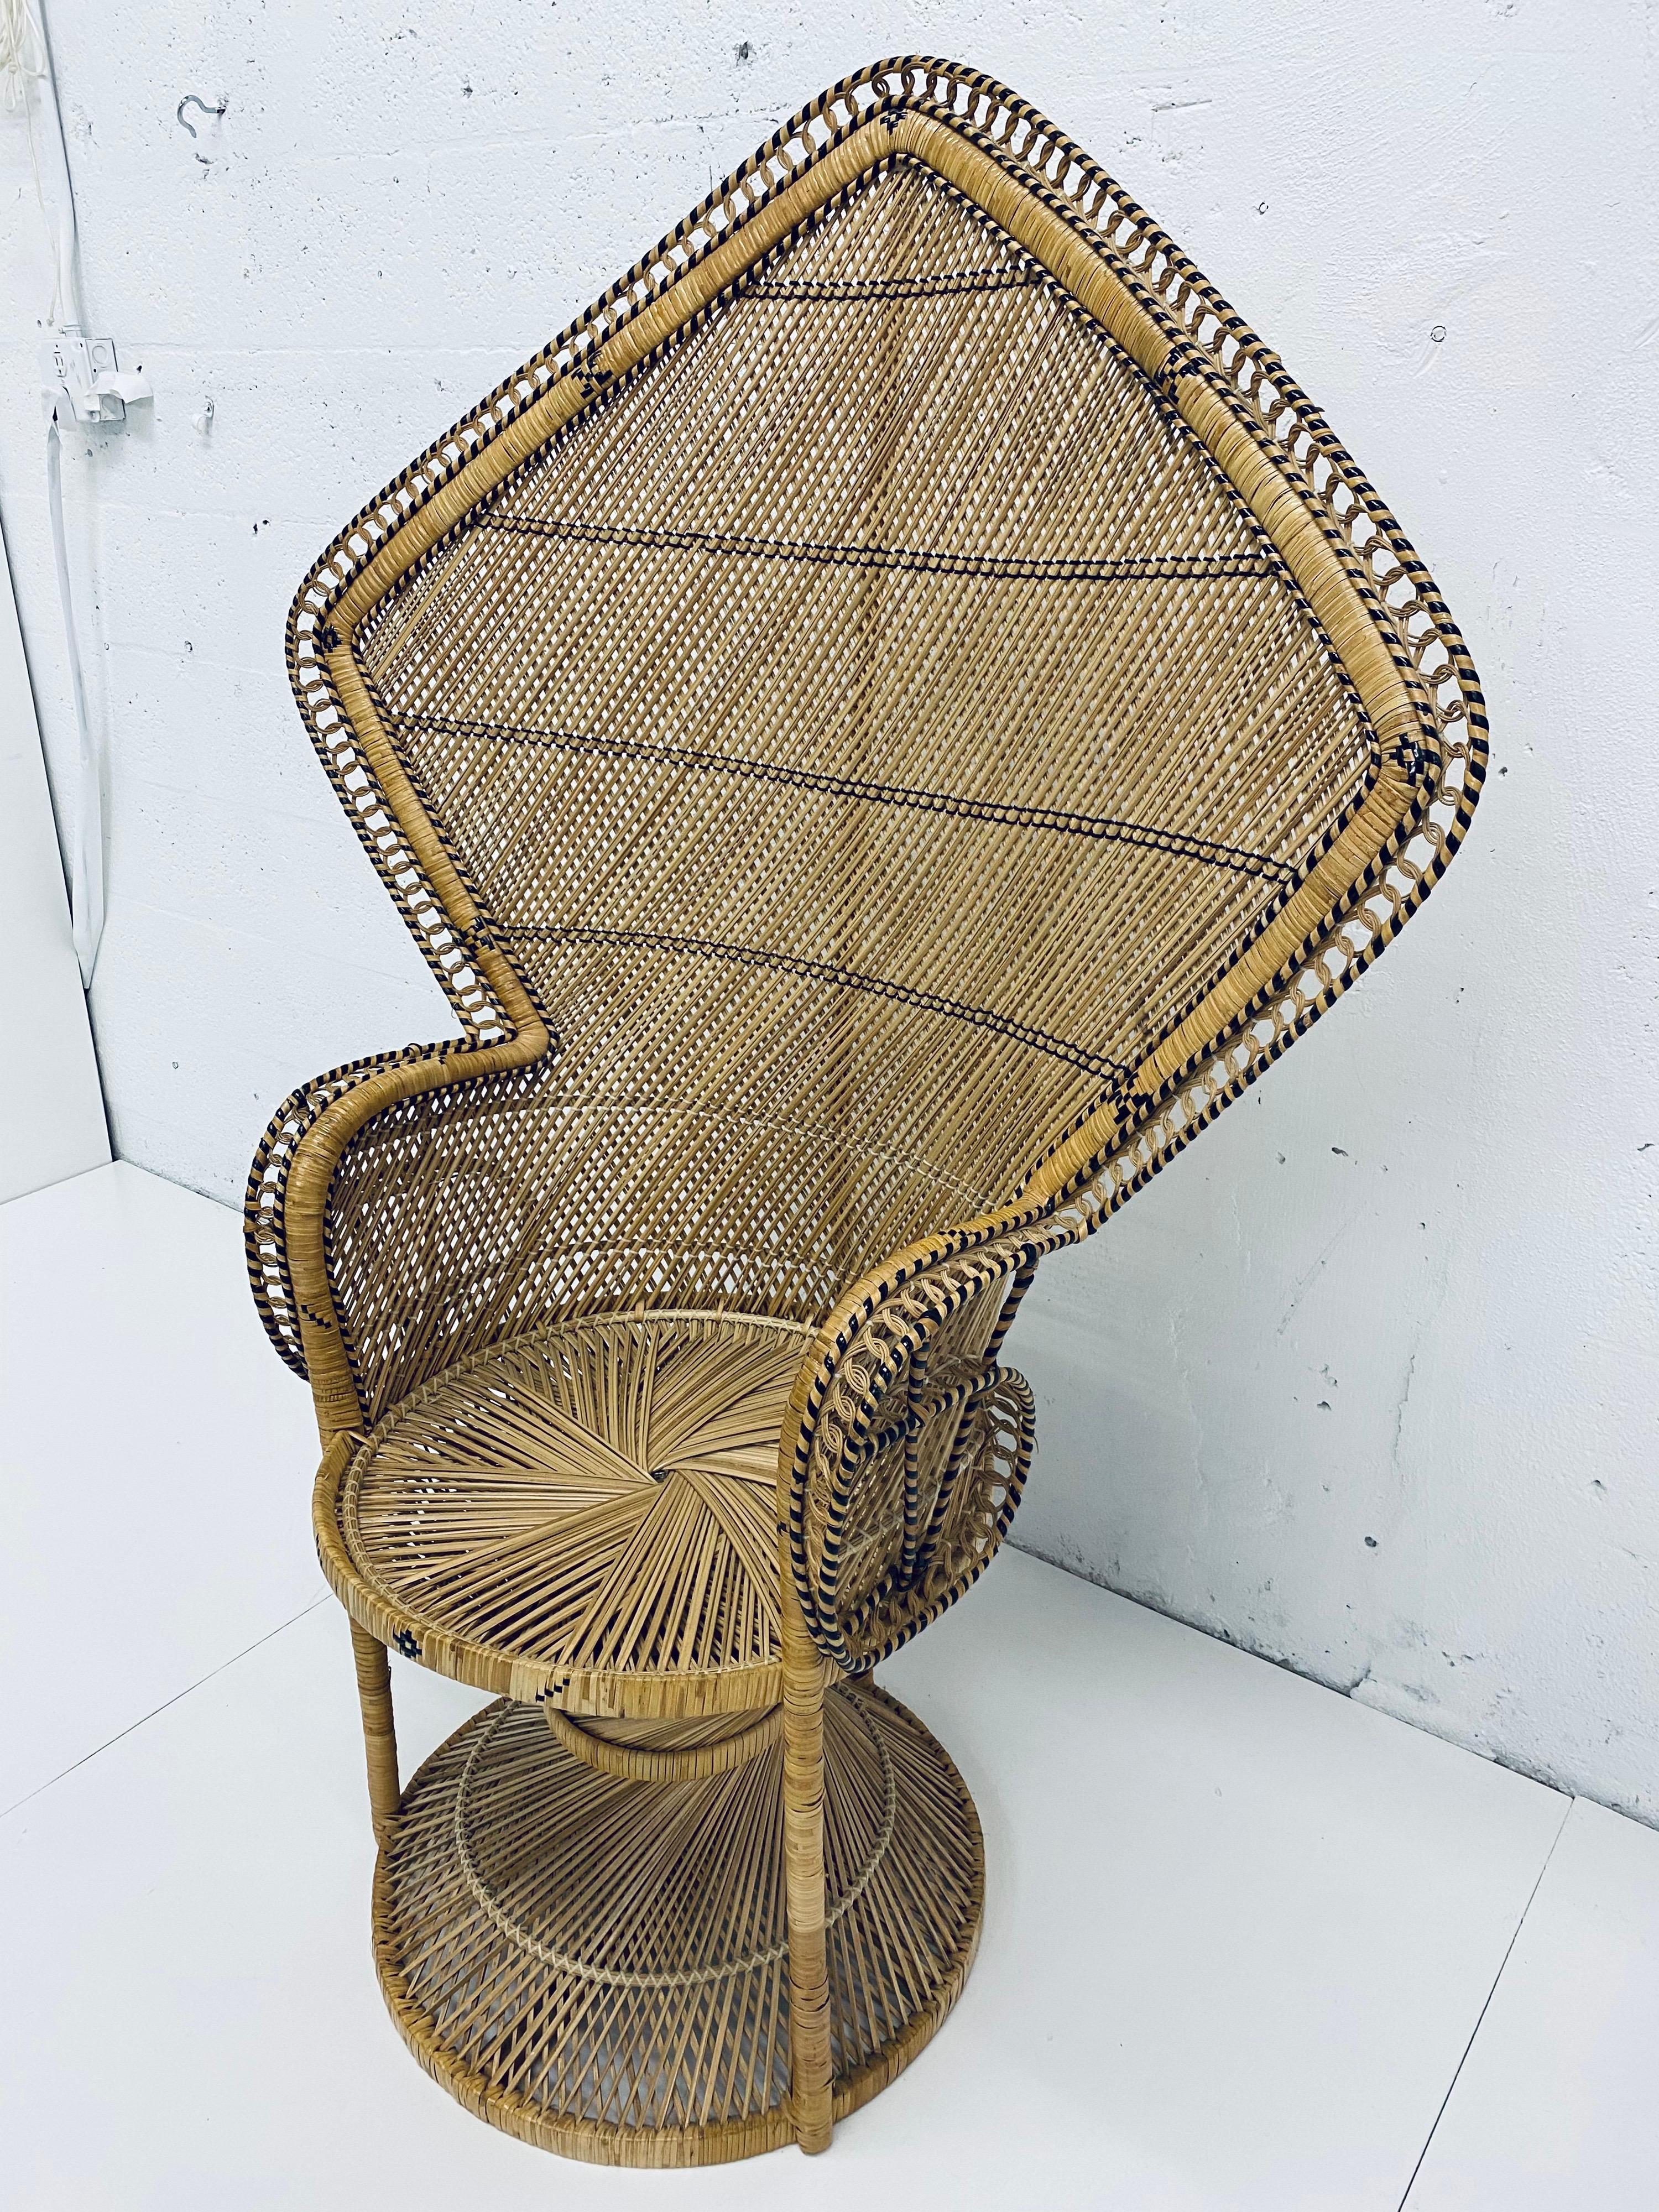 Vintage peacock angular chair in rattan from the 1970s. Rattan is in excellent condition with only minor wear.